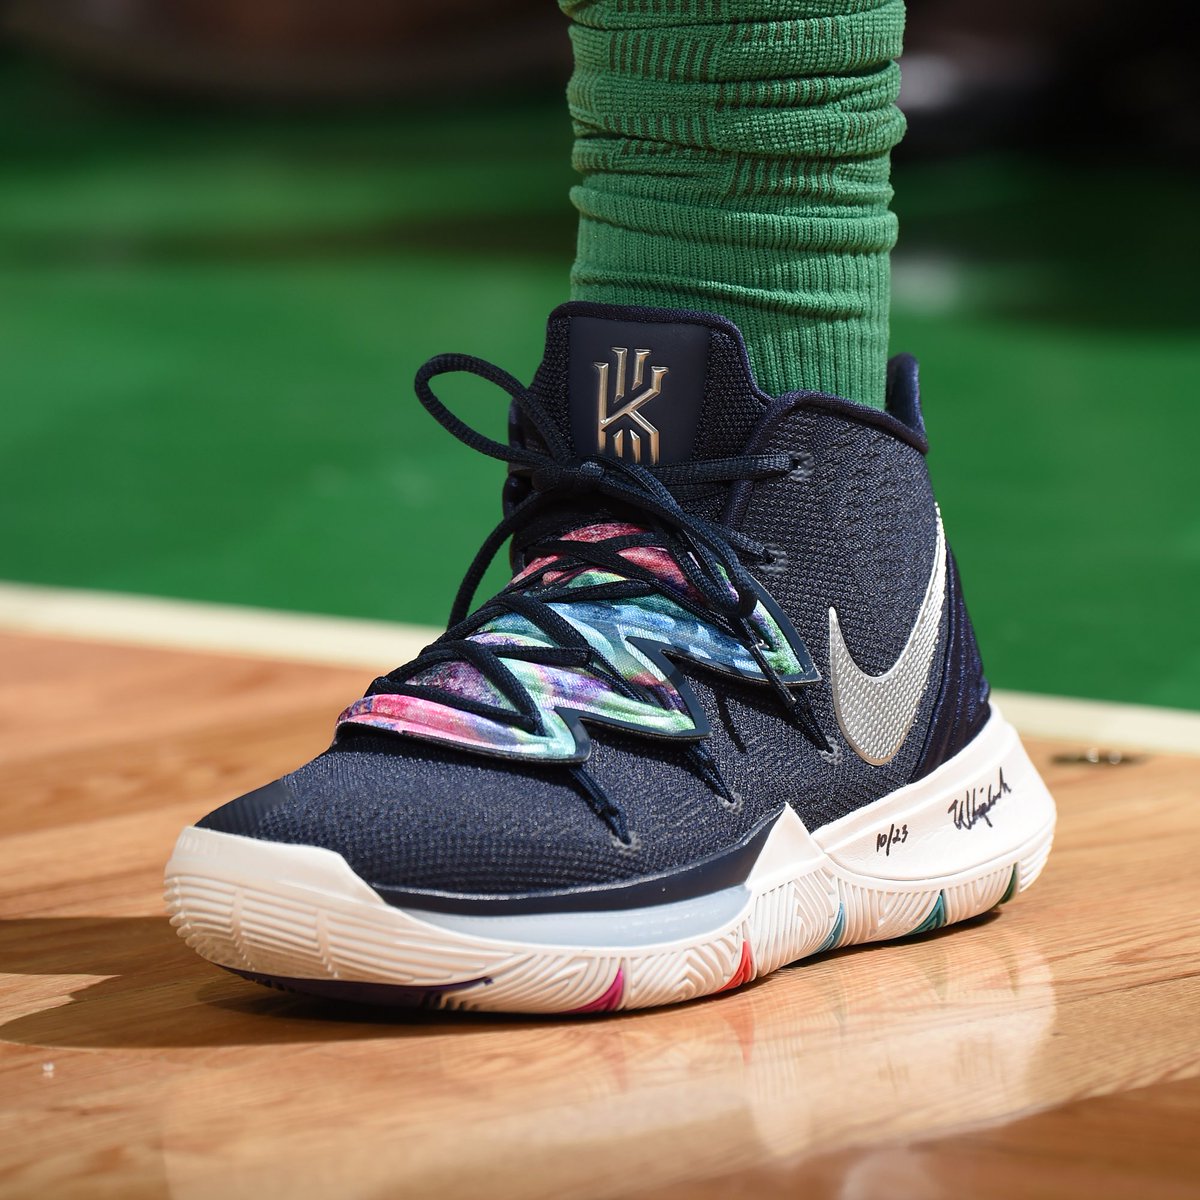 kyrie 5 colourway